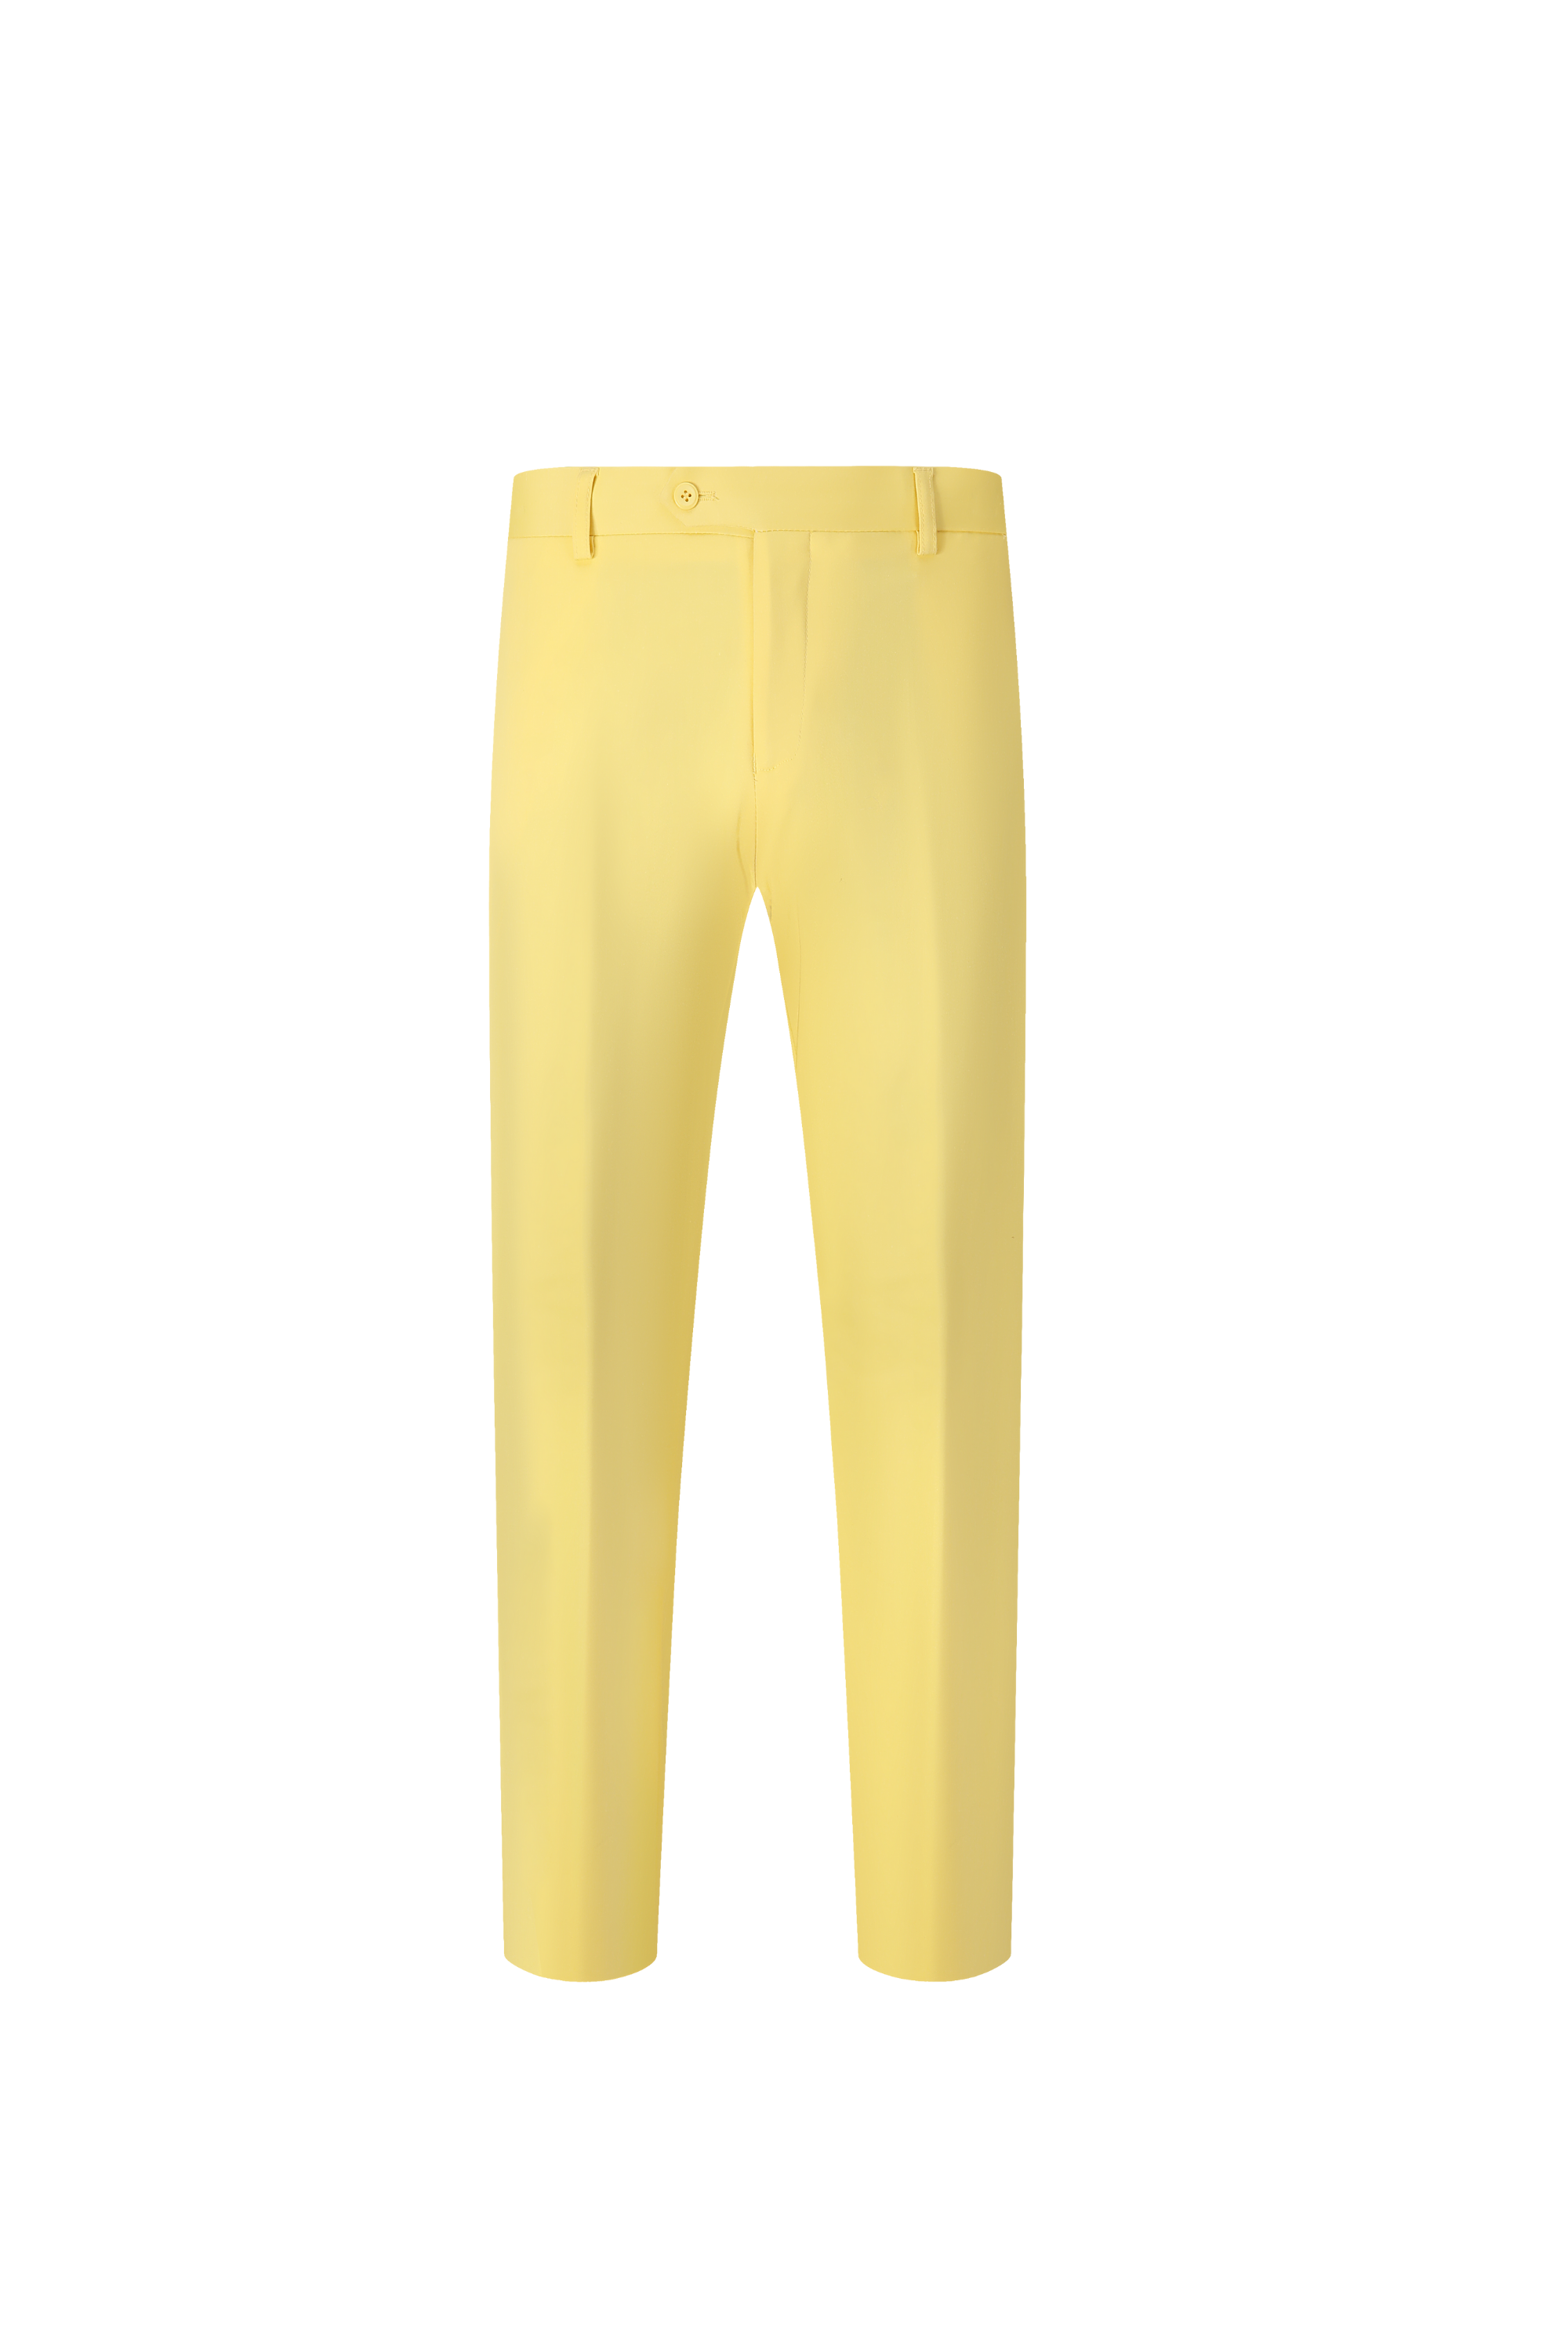 Yellow Suslo Sateen Suit (Two Piece)